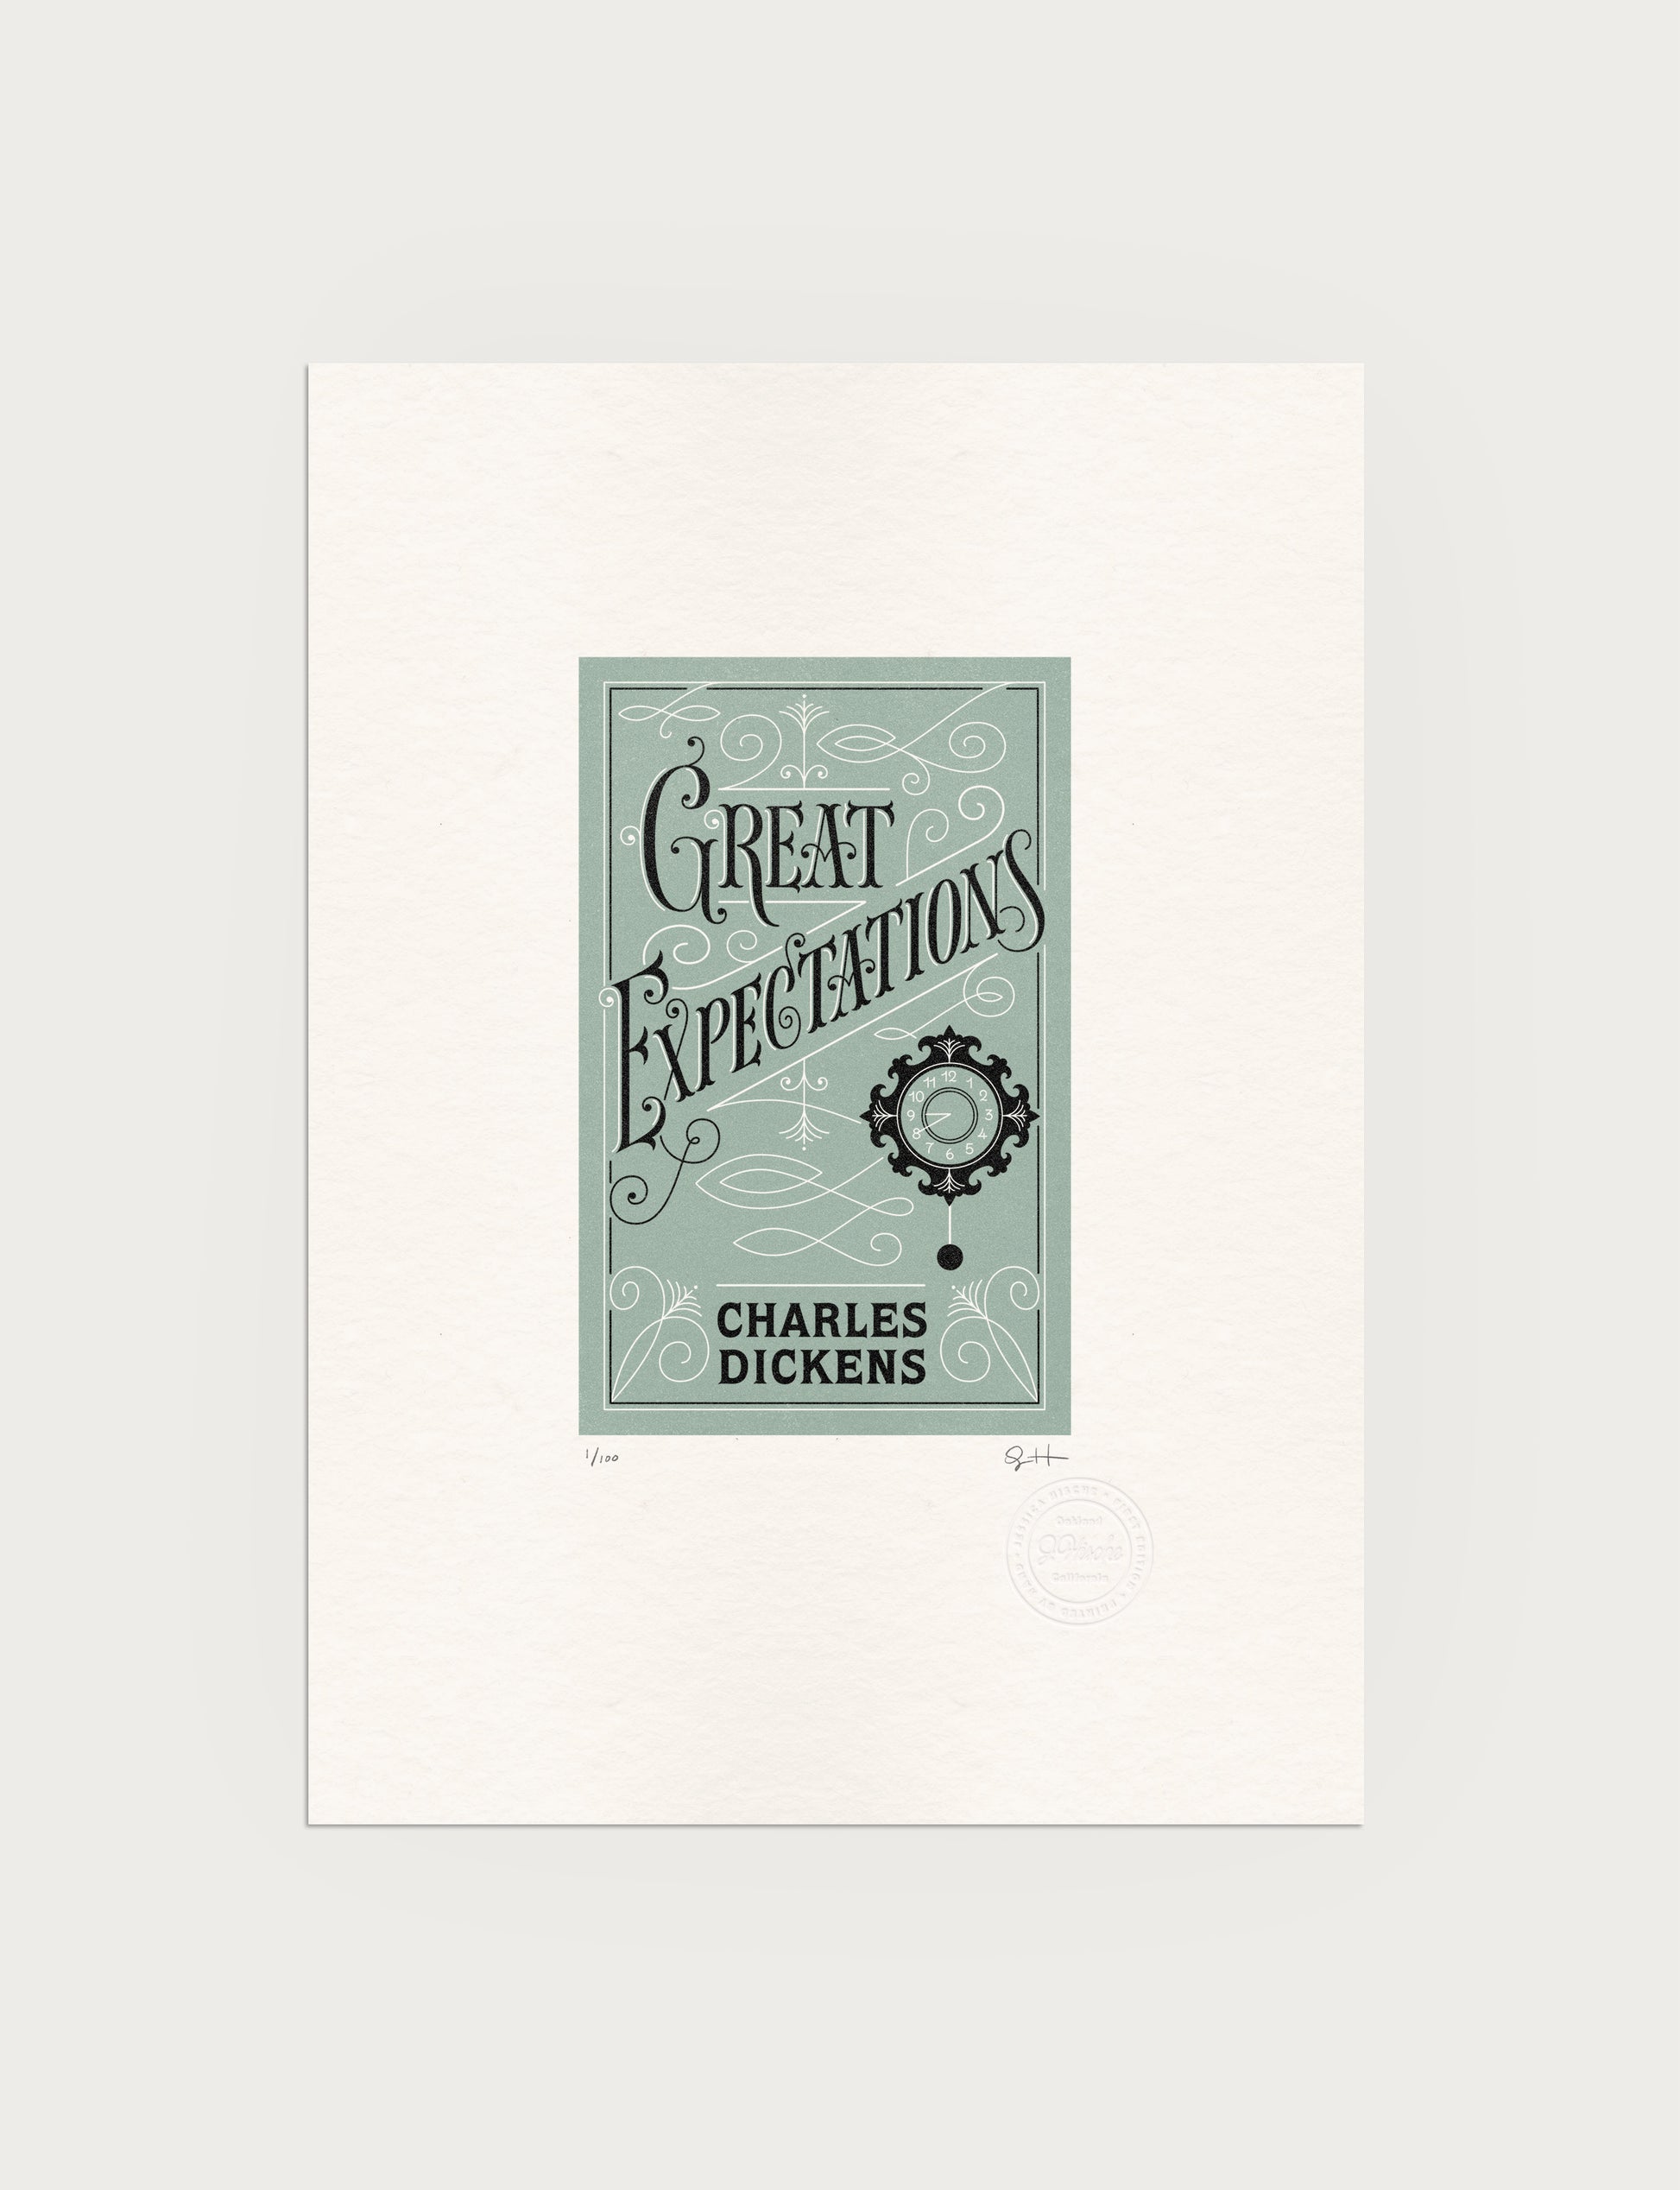 2-color letterpress print in green and black. Printed artwork is an illustrated book cover of Great Expectations including custom hand lettering.